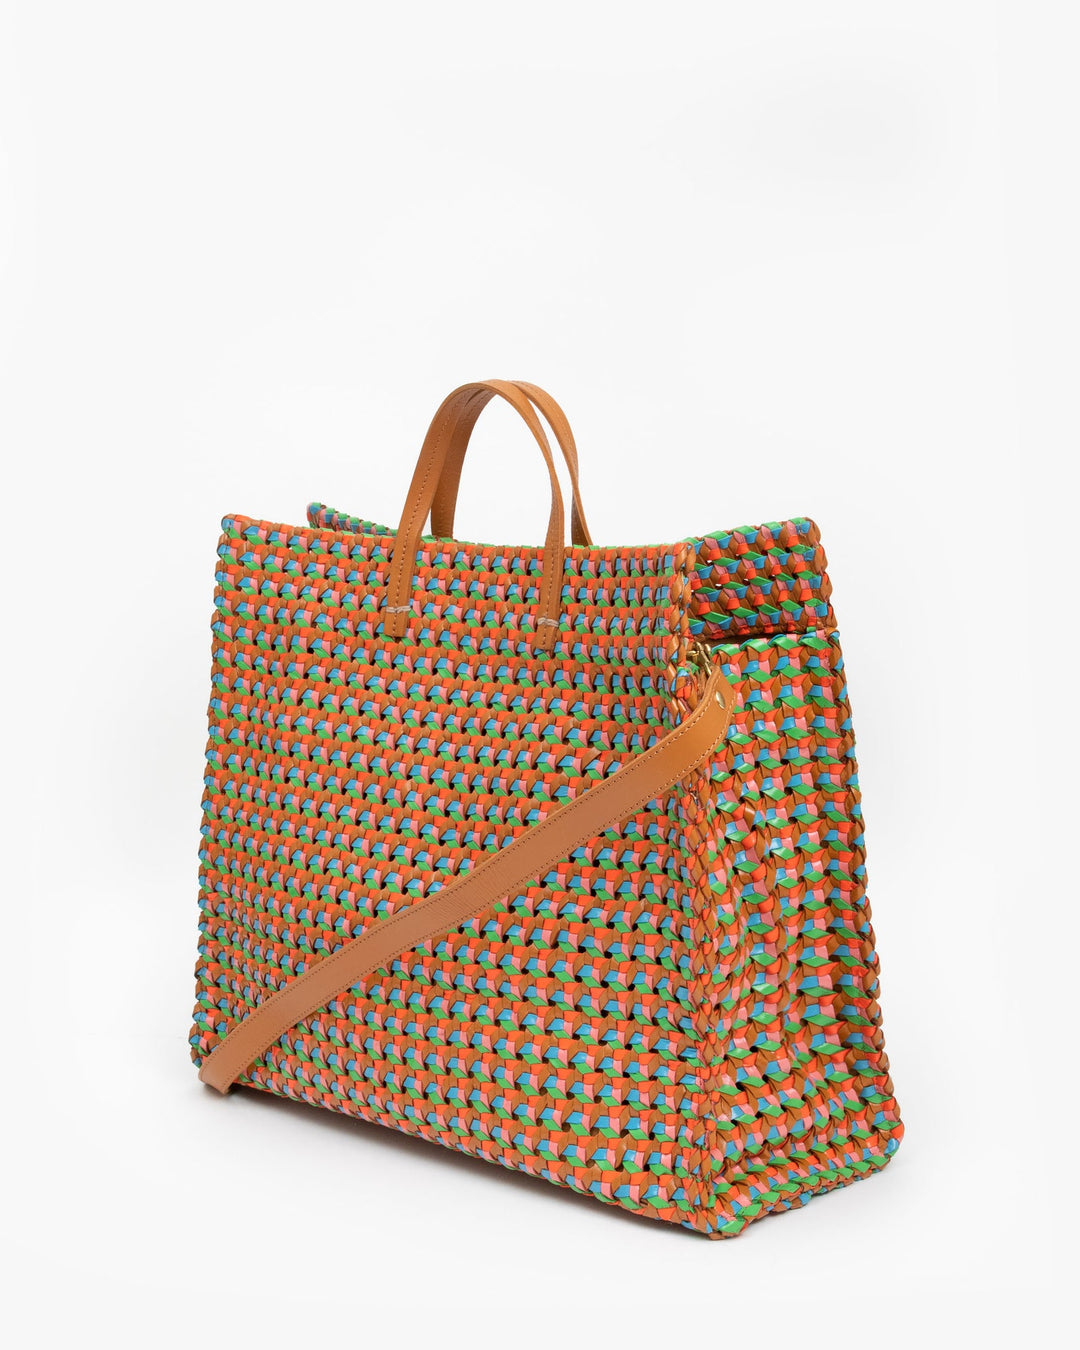 Clare V. - Simple Tote in Natural with Multi Rattan